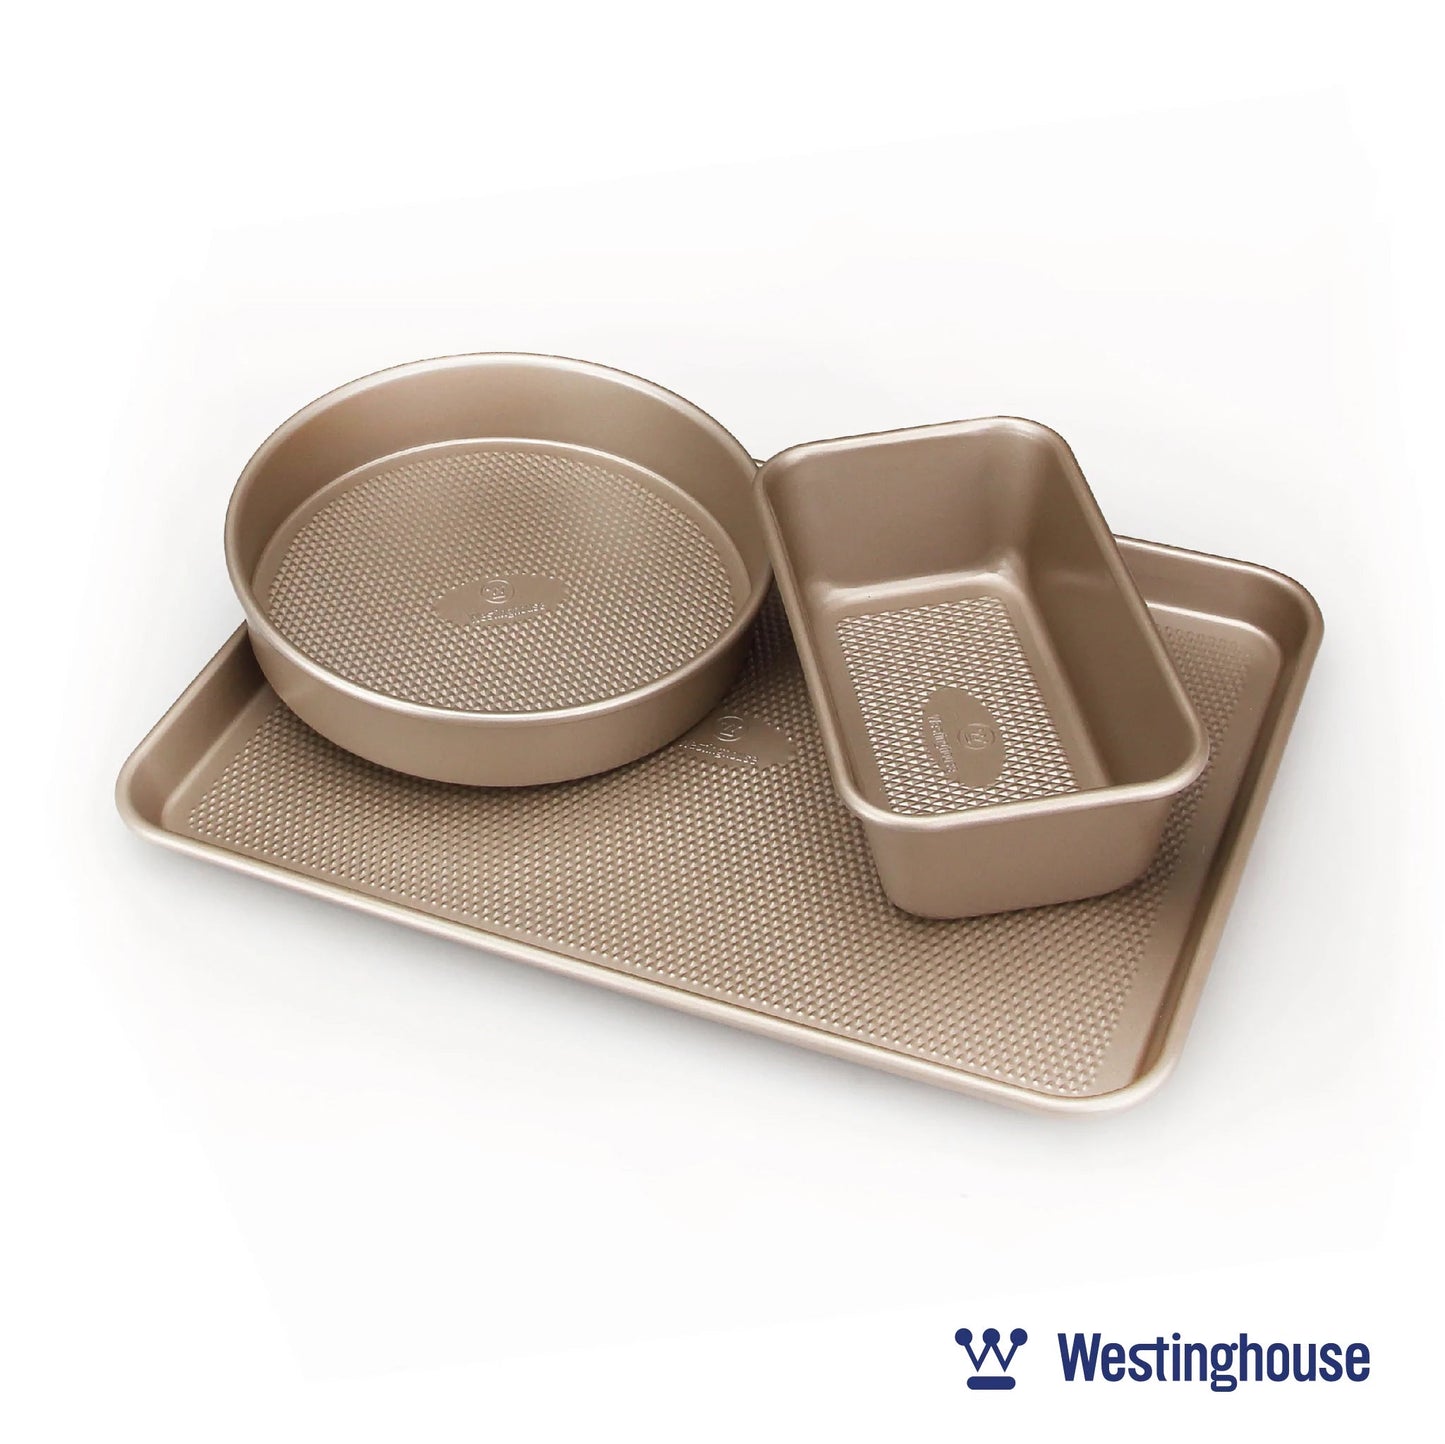 Westinghouse 3-Piece Carbon Steel Premium Non-stick Baking Pan Set With Loaf Pan, Round Pan, and Cookie Tray